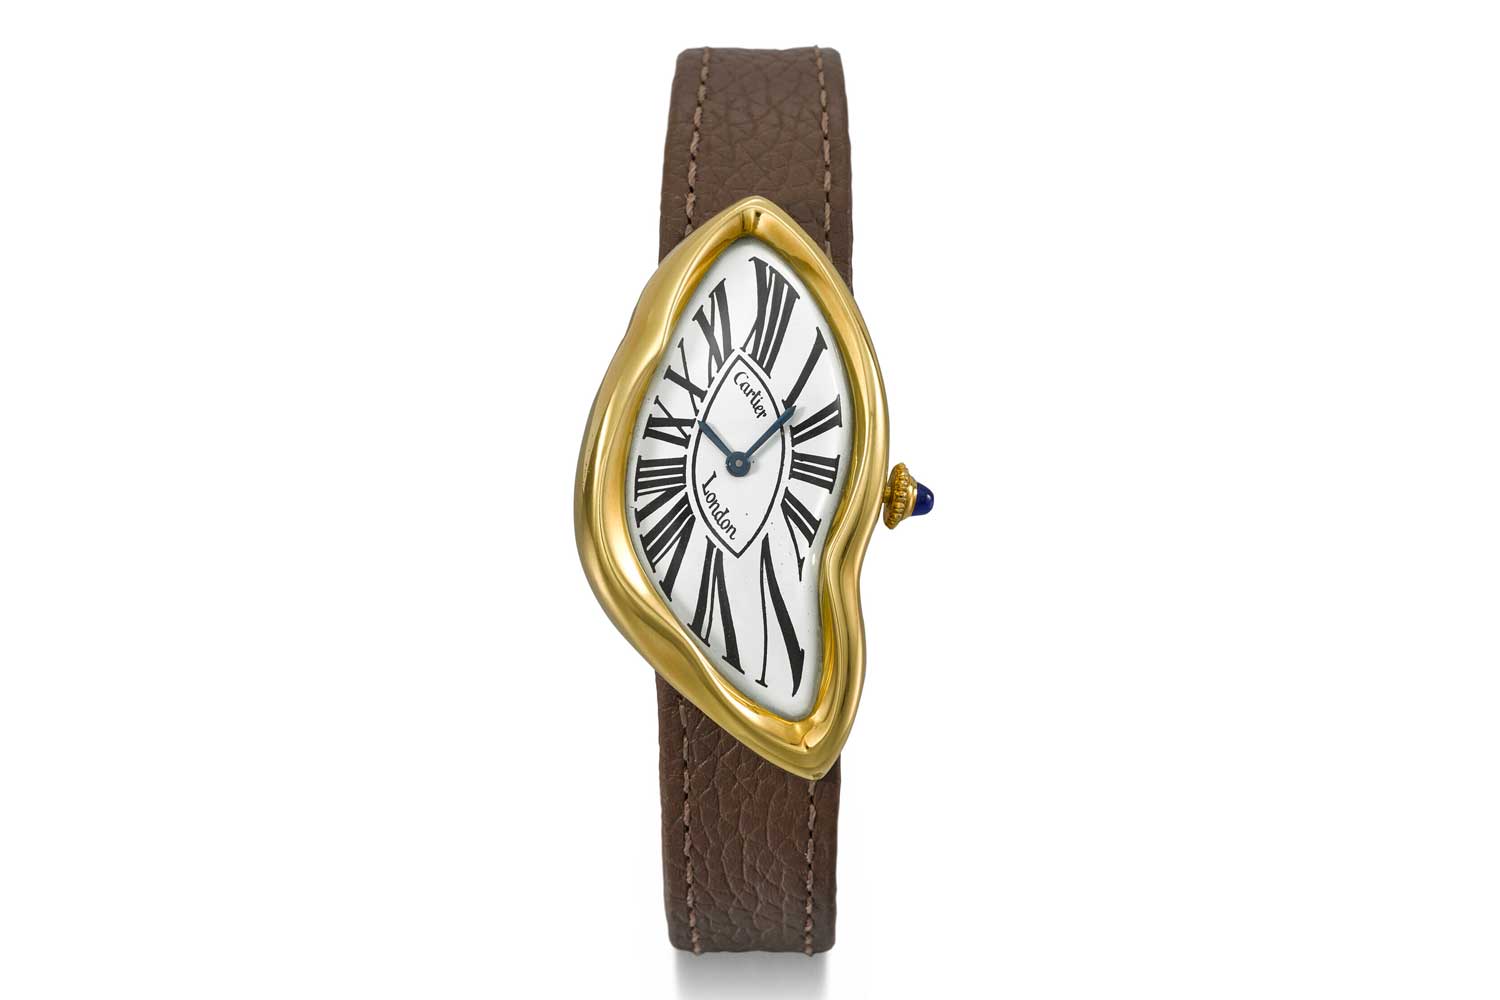 Lot 133: Cartier, an exceptionally rare and attractive 18k gold asymmetric wristwatch with original ‘Crash’ deployant clasp (Image: Christie’s)